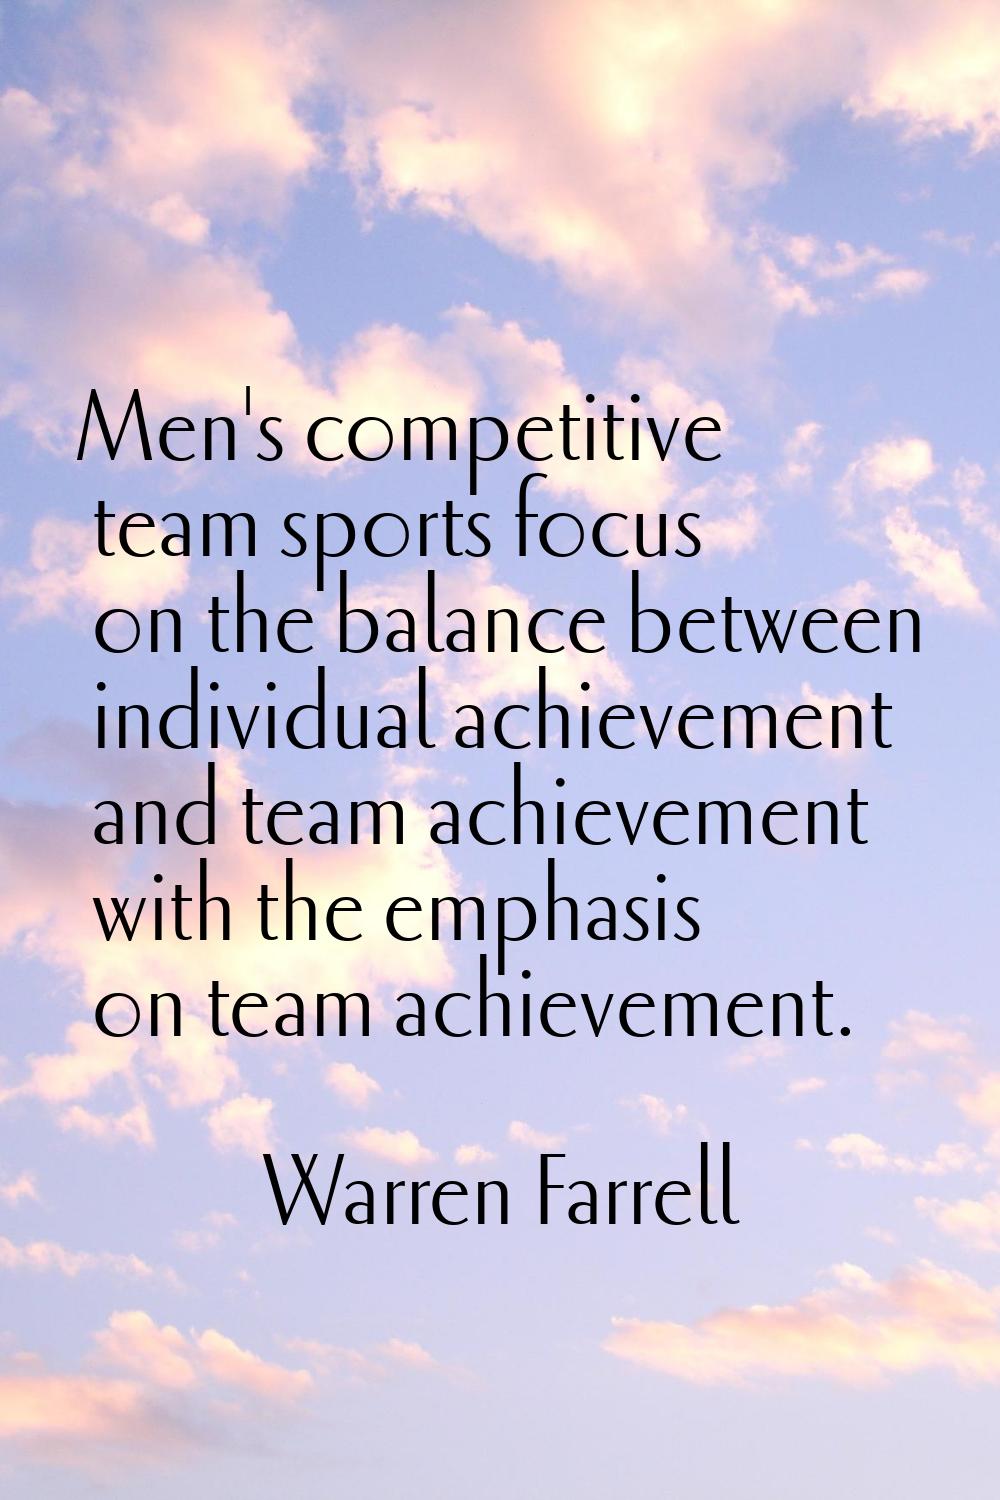 Men's competitive team sports focus on the balance between individual achievement and team achievem